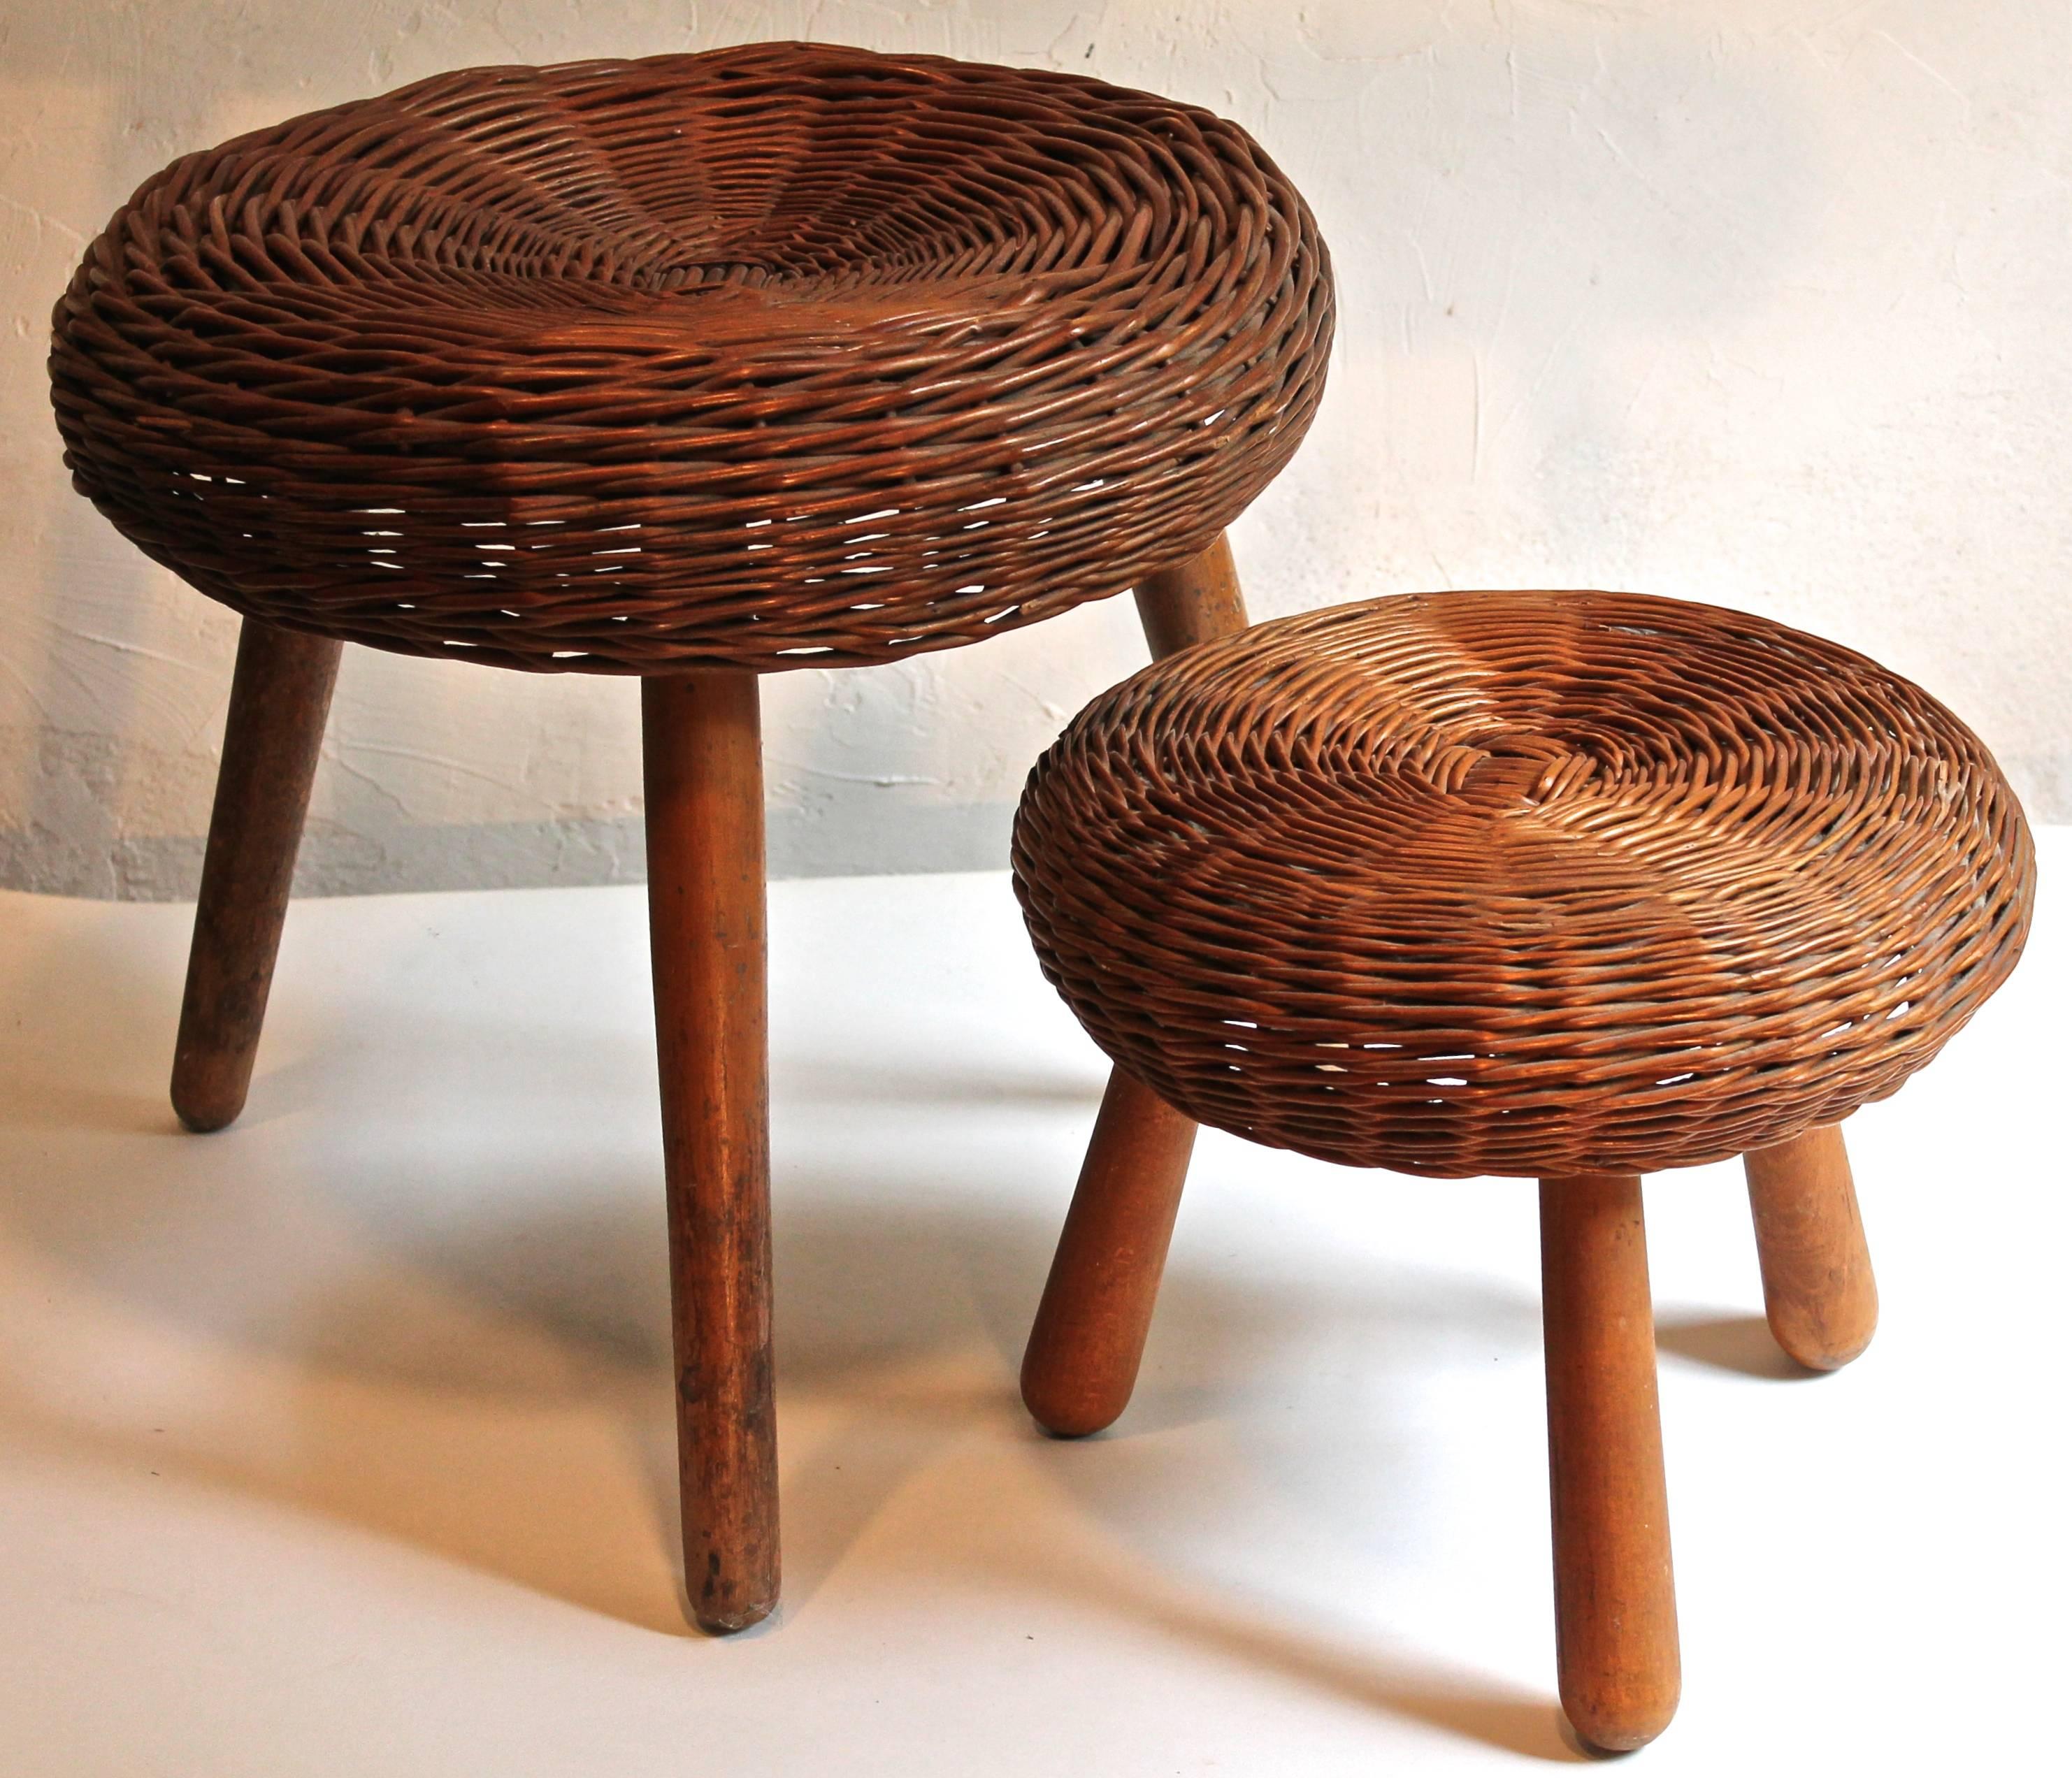 Two stools, large and small. Measure: The larger 16